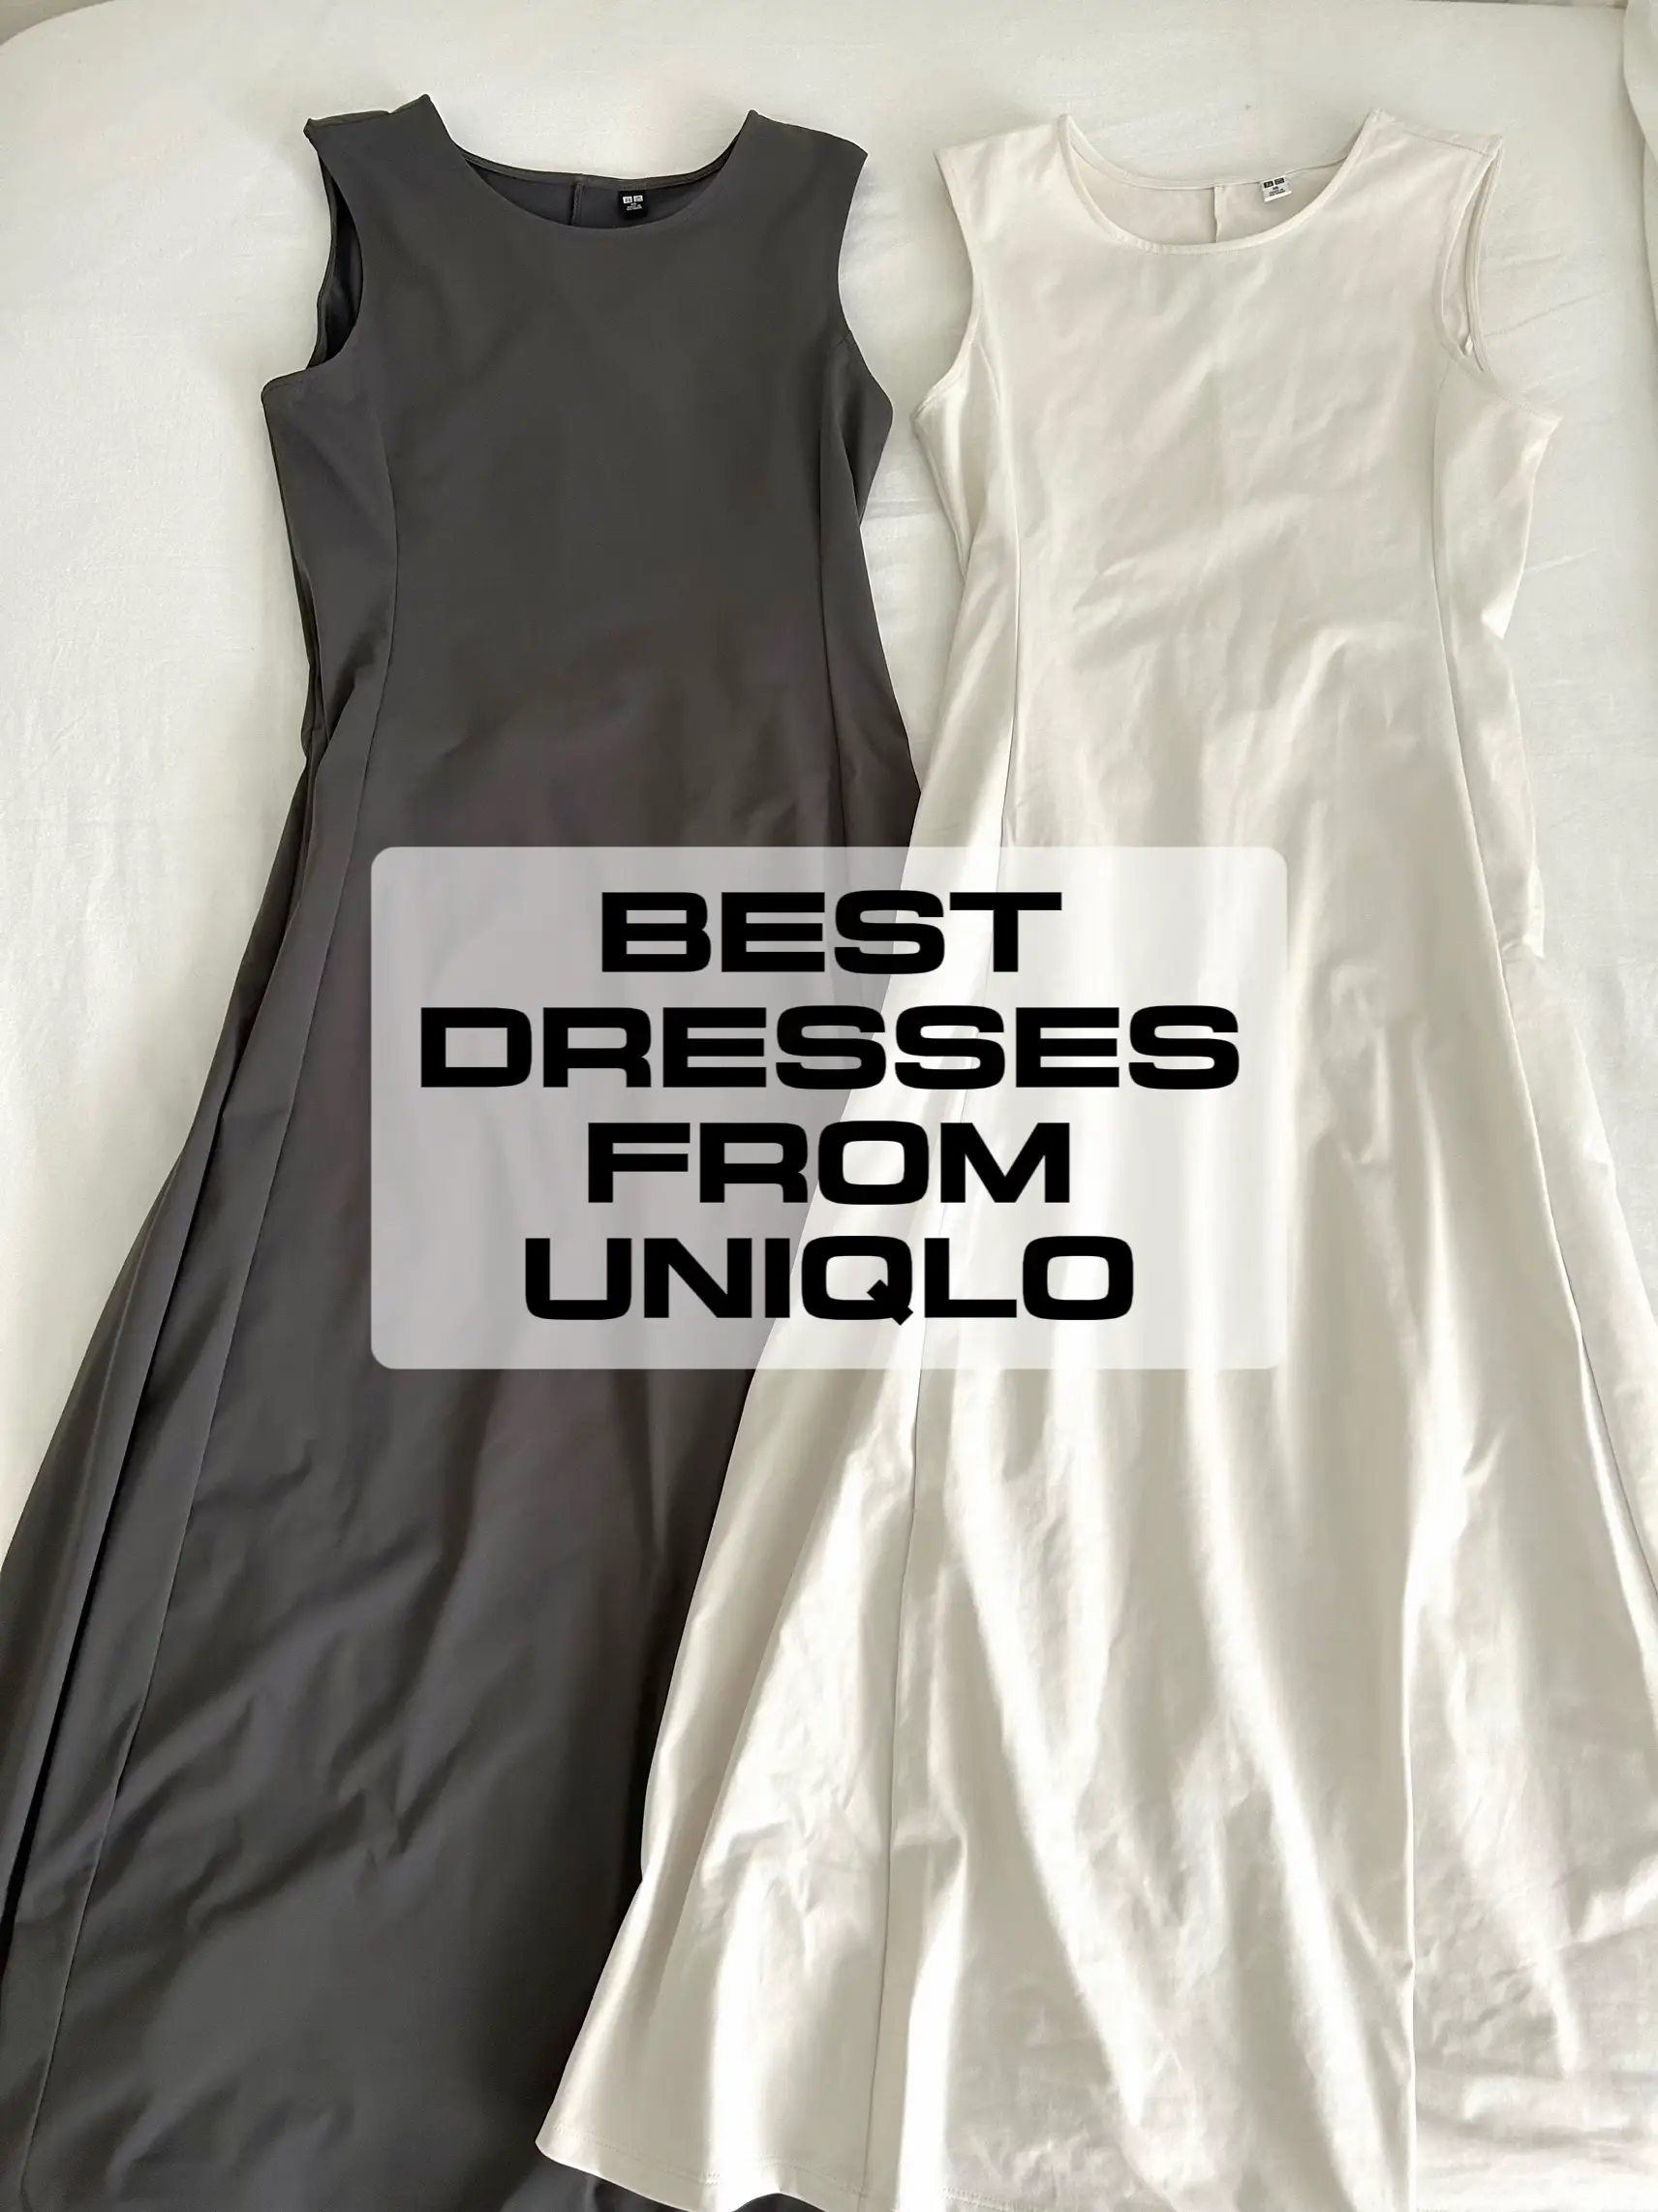 Uniqlo Dresses - Try On & Review!, Gallery posted by Kaitlyn